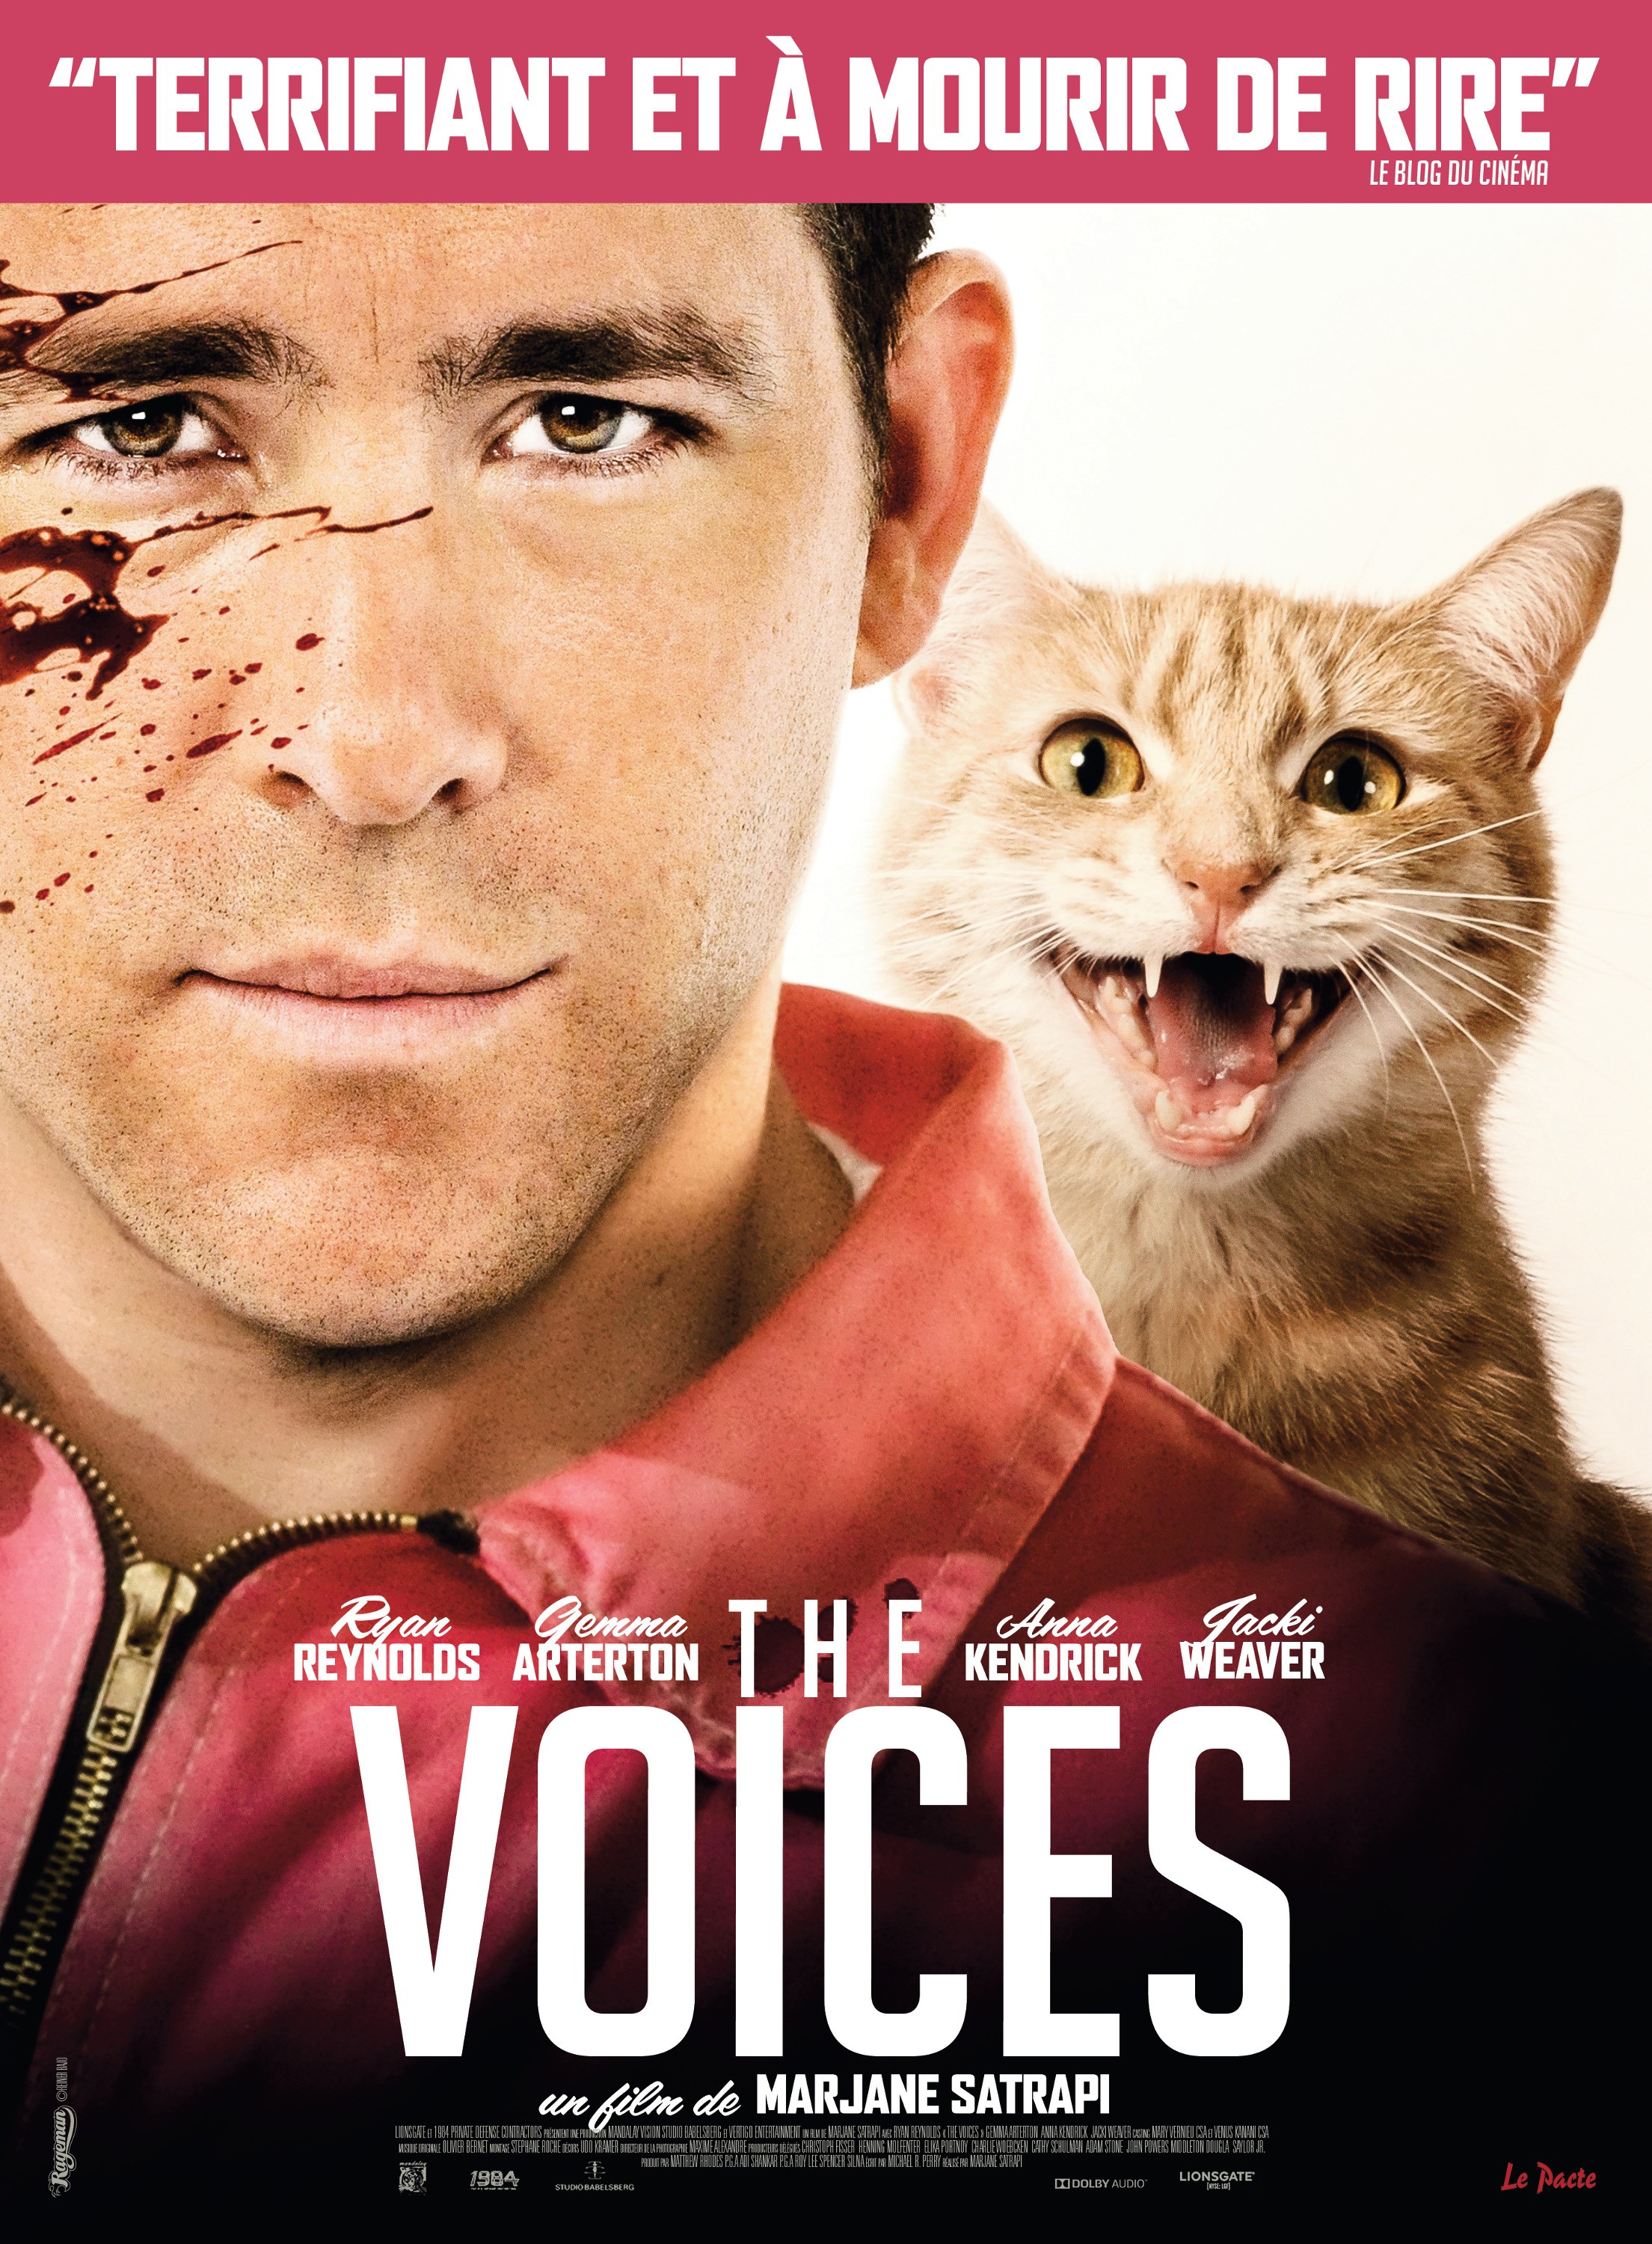 Mega Sized Movie Poster Image for The Voices (#4 of 10)